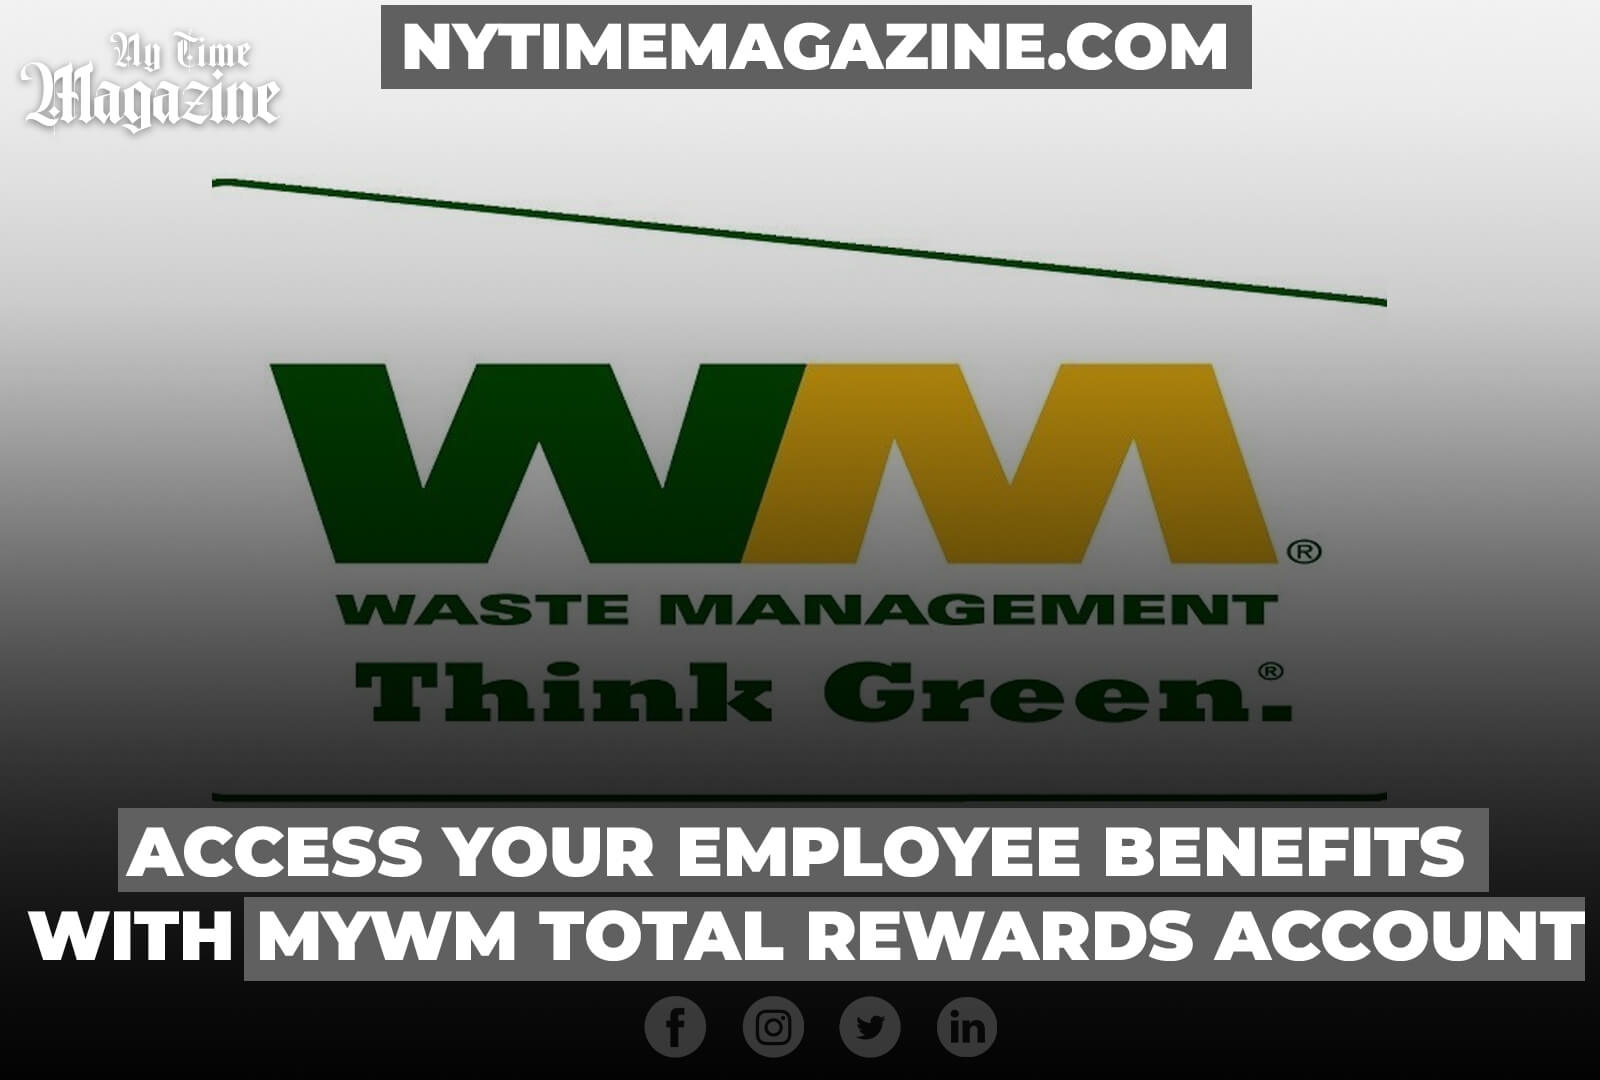 ACCESS YOUR EMPLOYEE BENEFITS WITH MYWM TOTAL REWARDS ACCOUNT